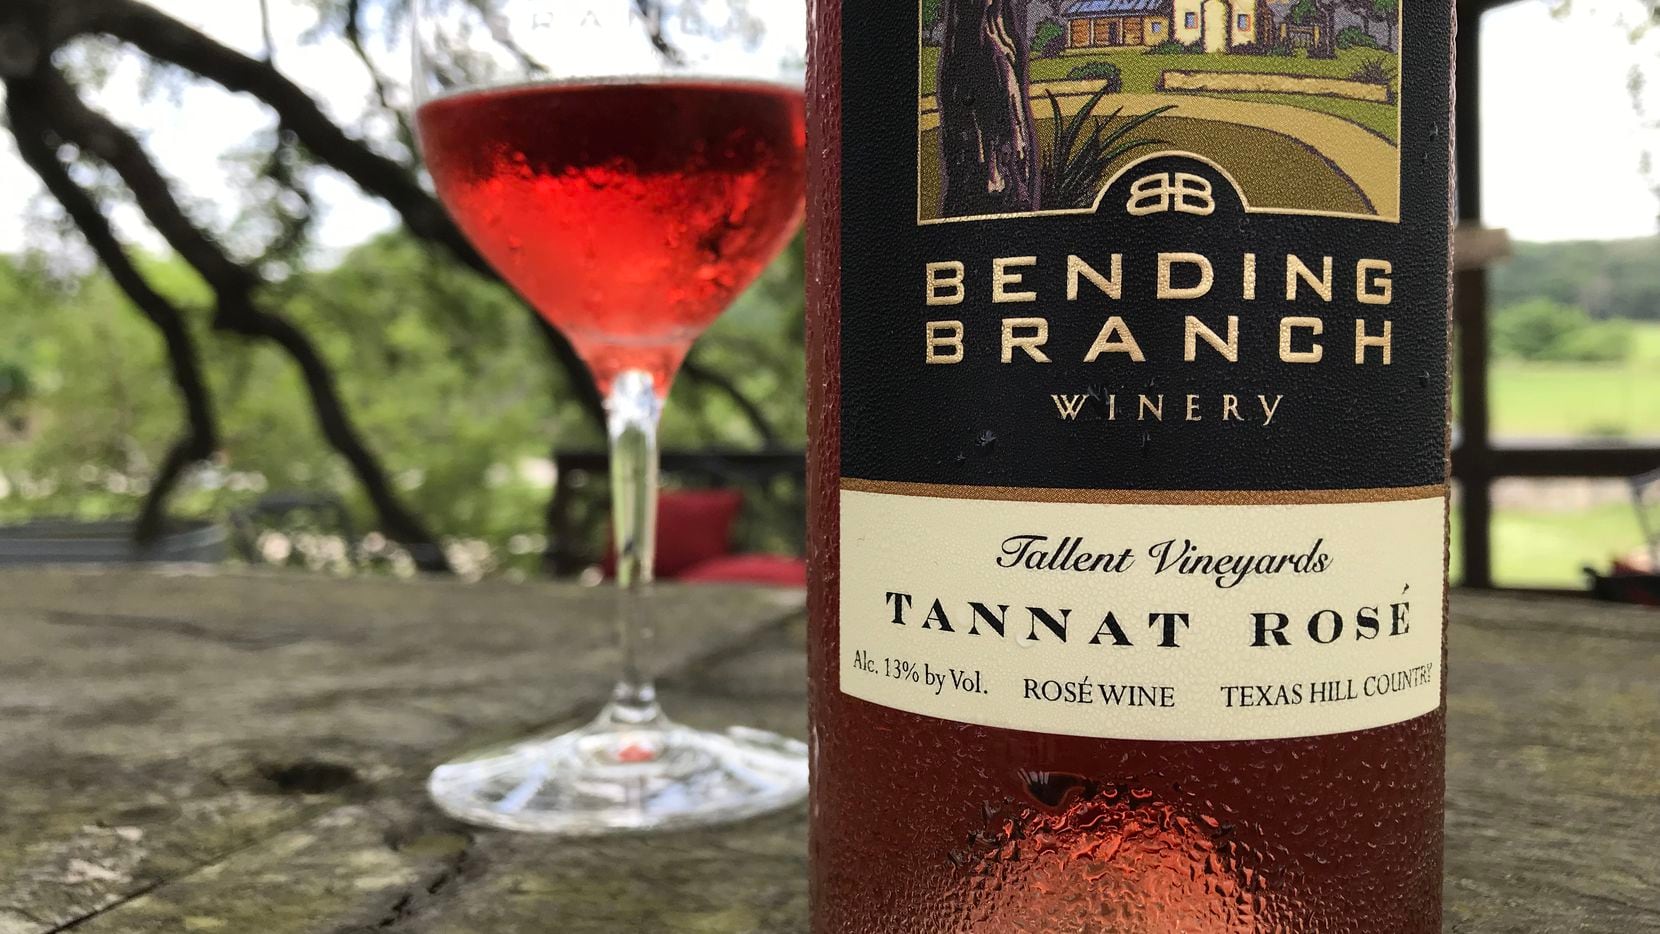 Bending Branch Winery's Tannat Rose wine, with grapes from Tallent Vineyards.